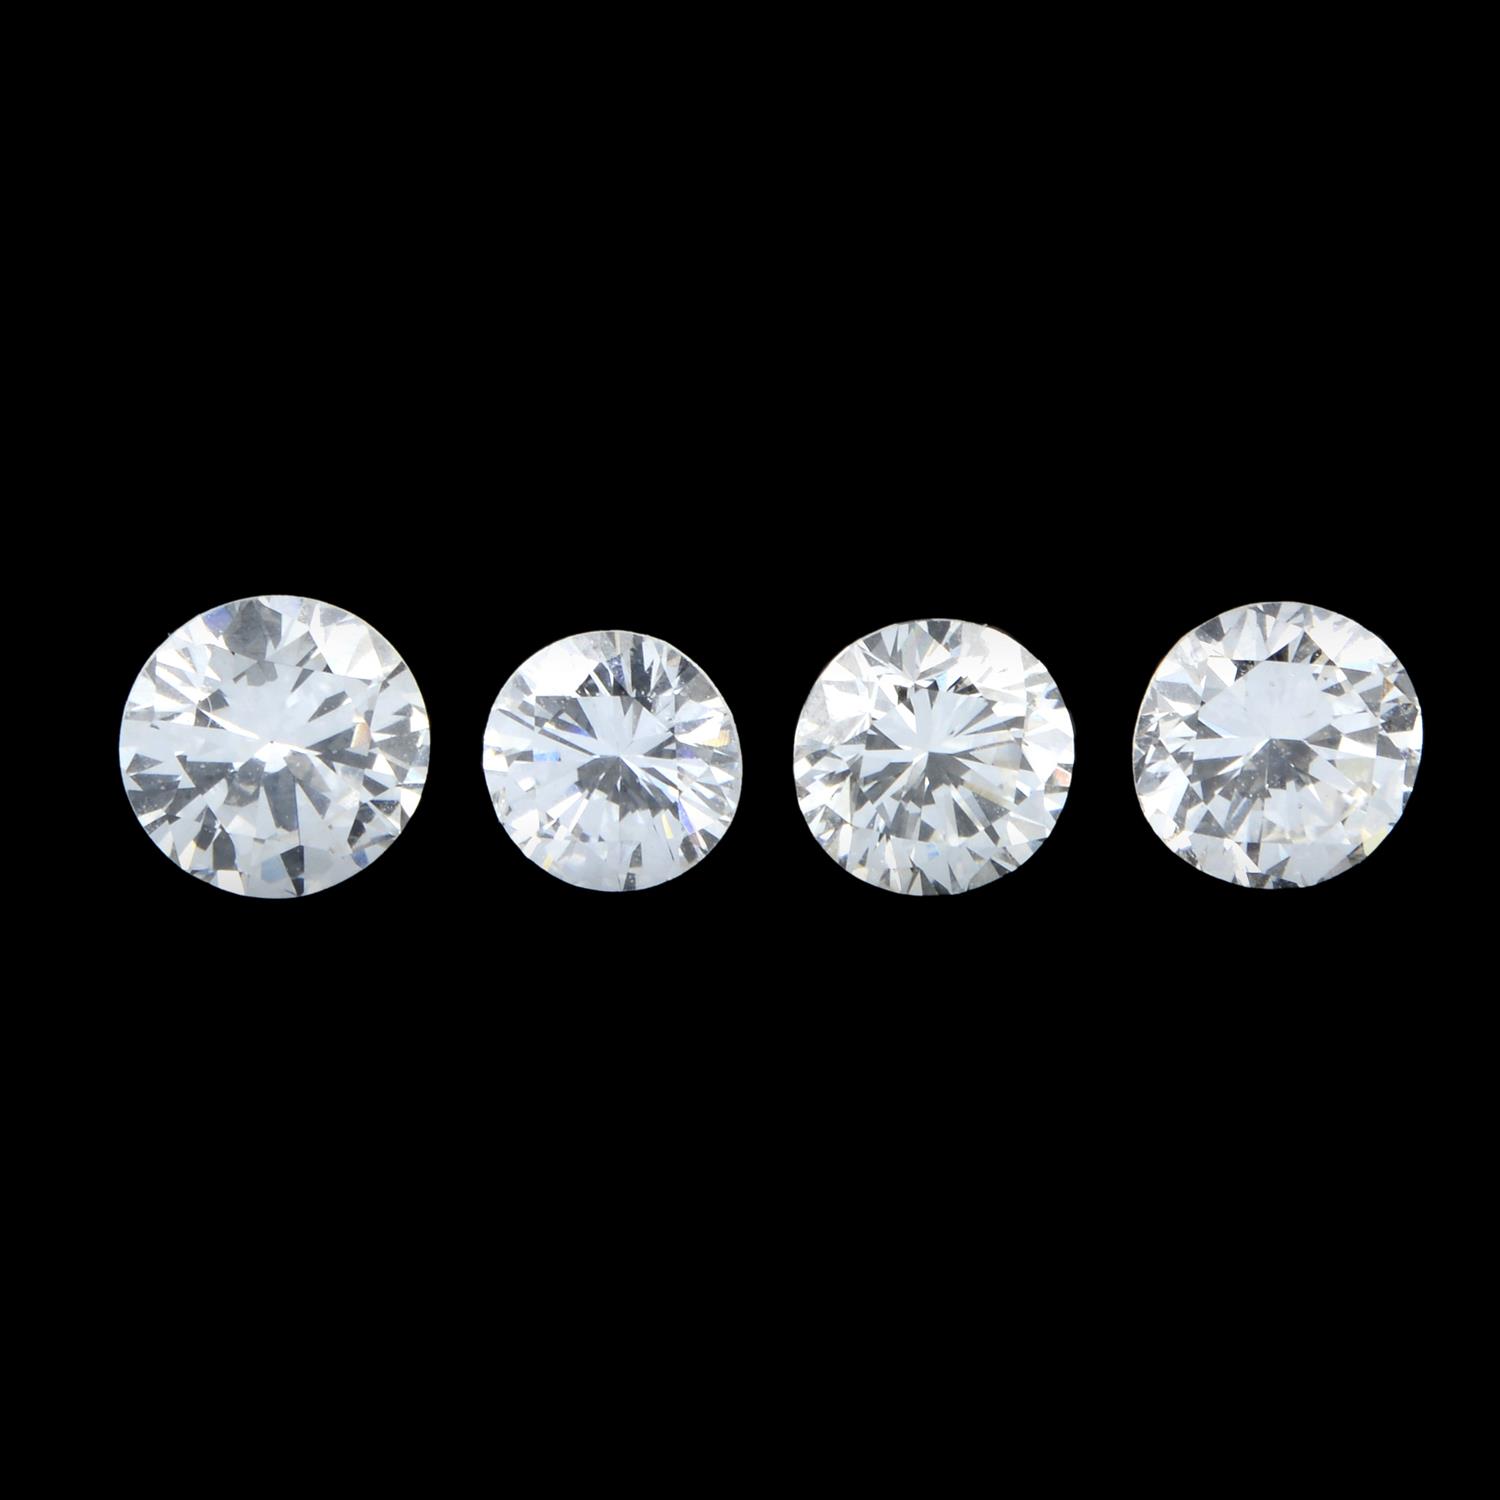 Four brilliant cut diamonds weighing 1.04ct